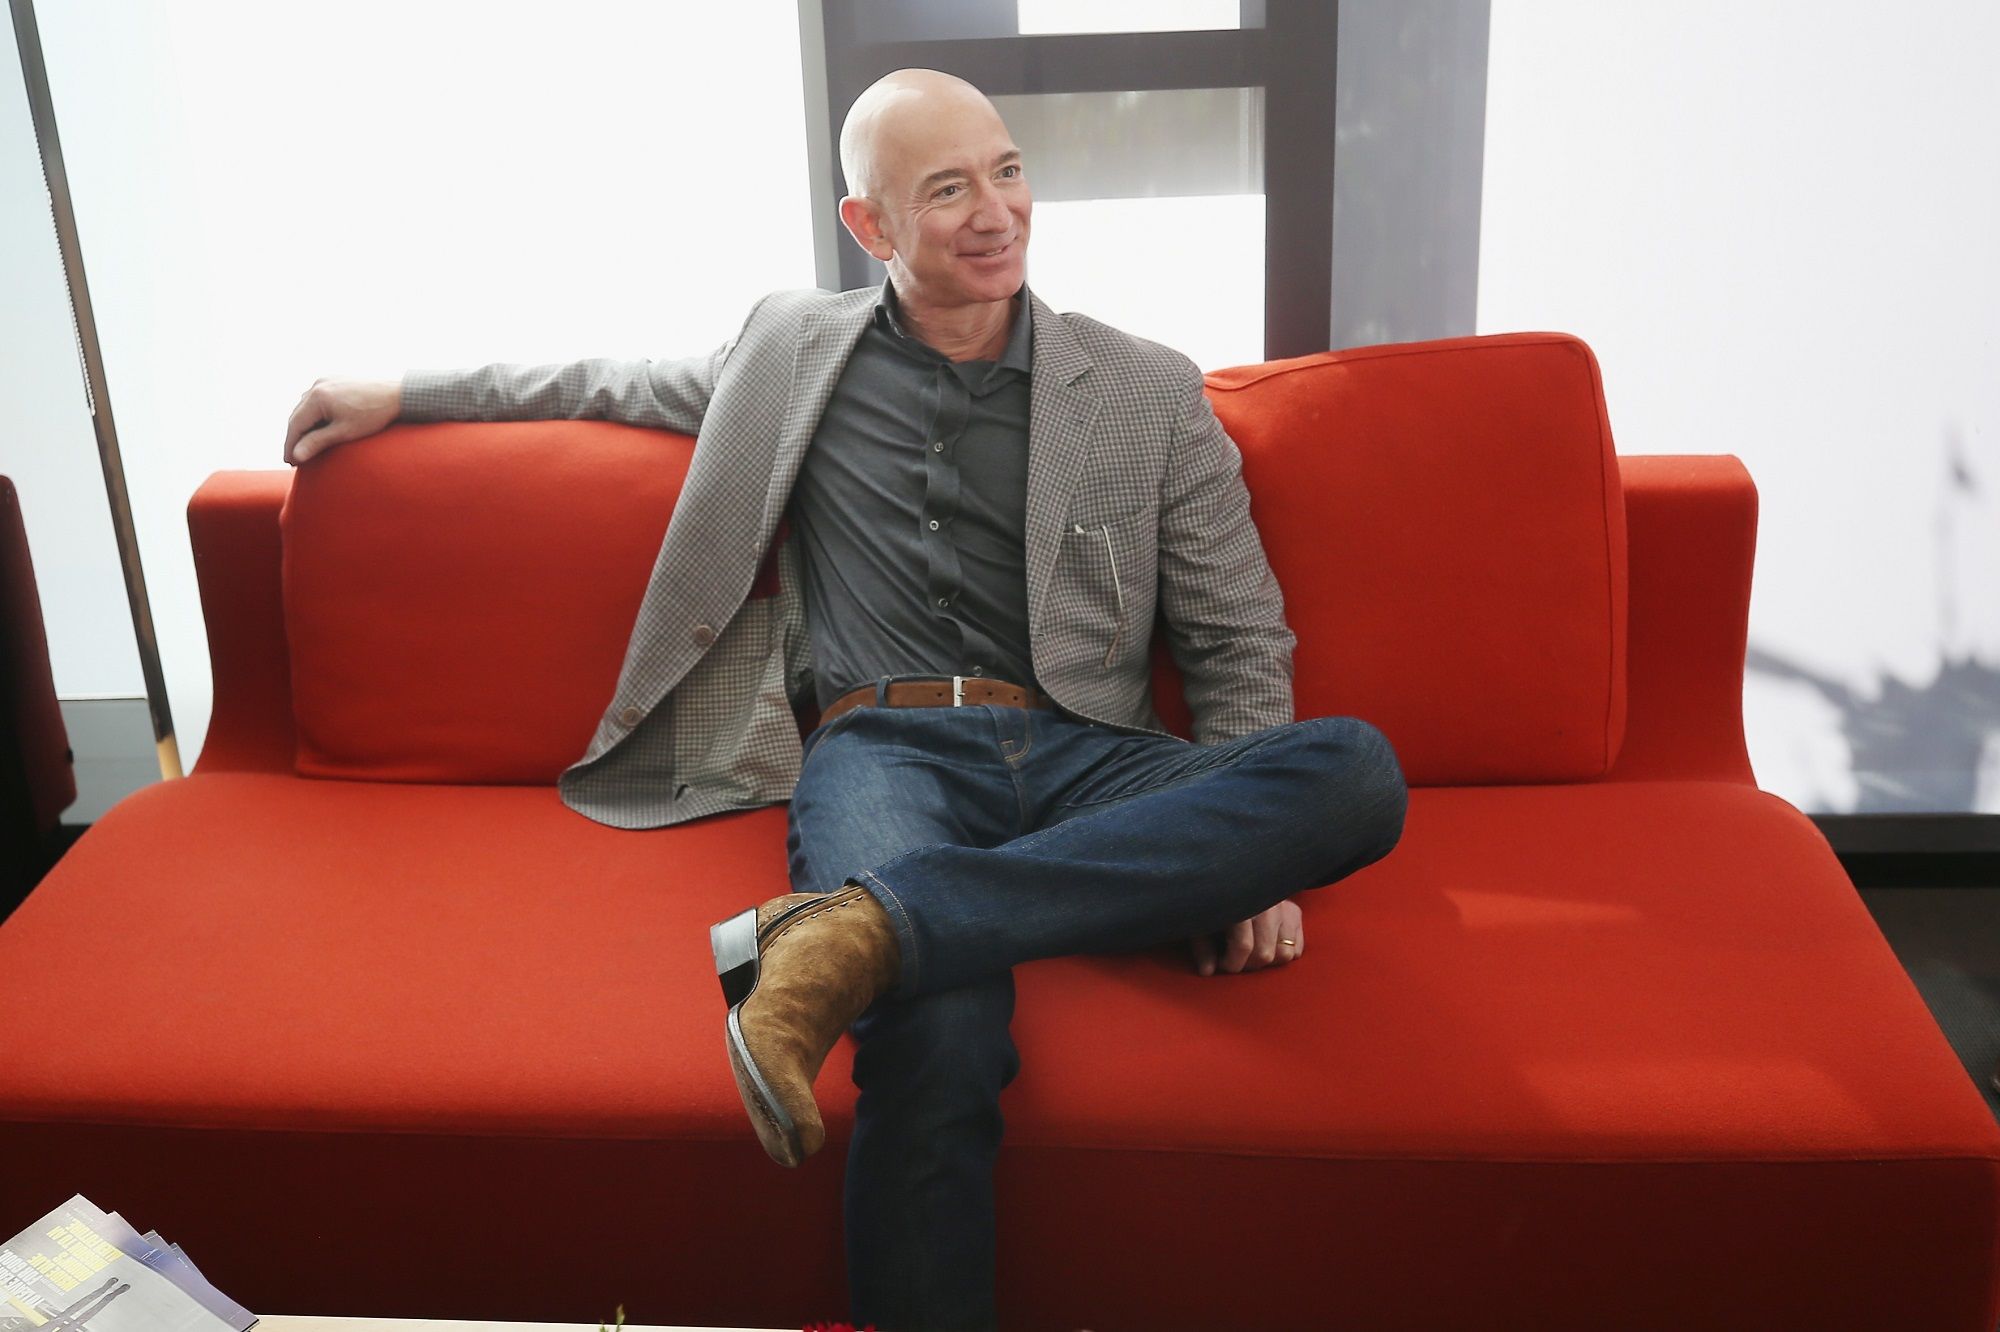 Amazon CEO Bezos sells roughly $2.8 billion worth of stock in a week